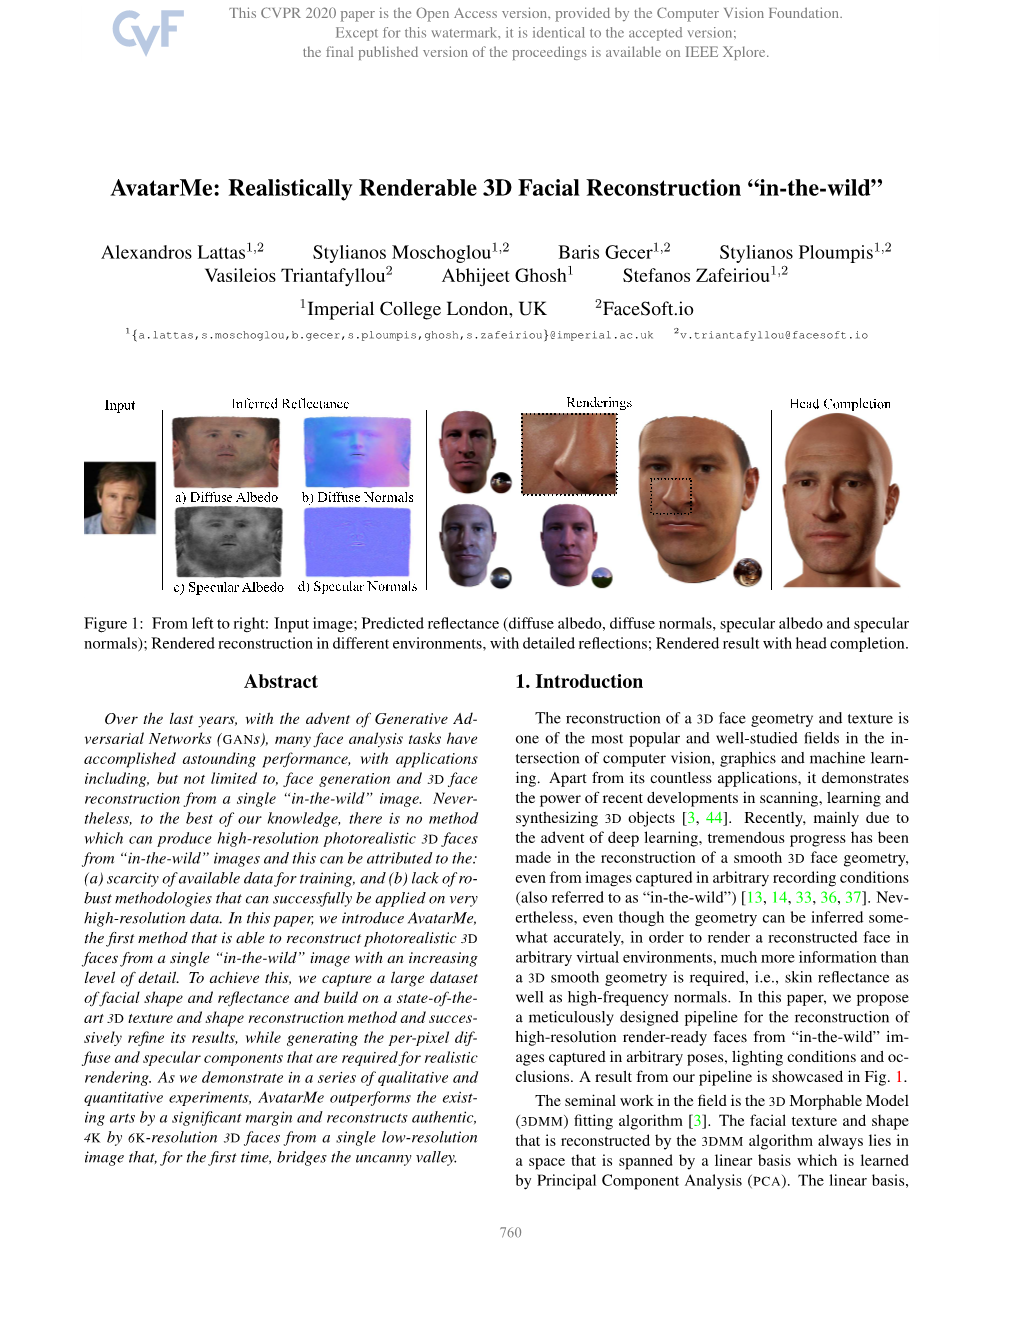 Avatarme: Realistically Renderable 3D Facial Reconstruction "In-The-Wild"